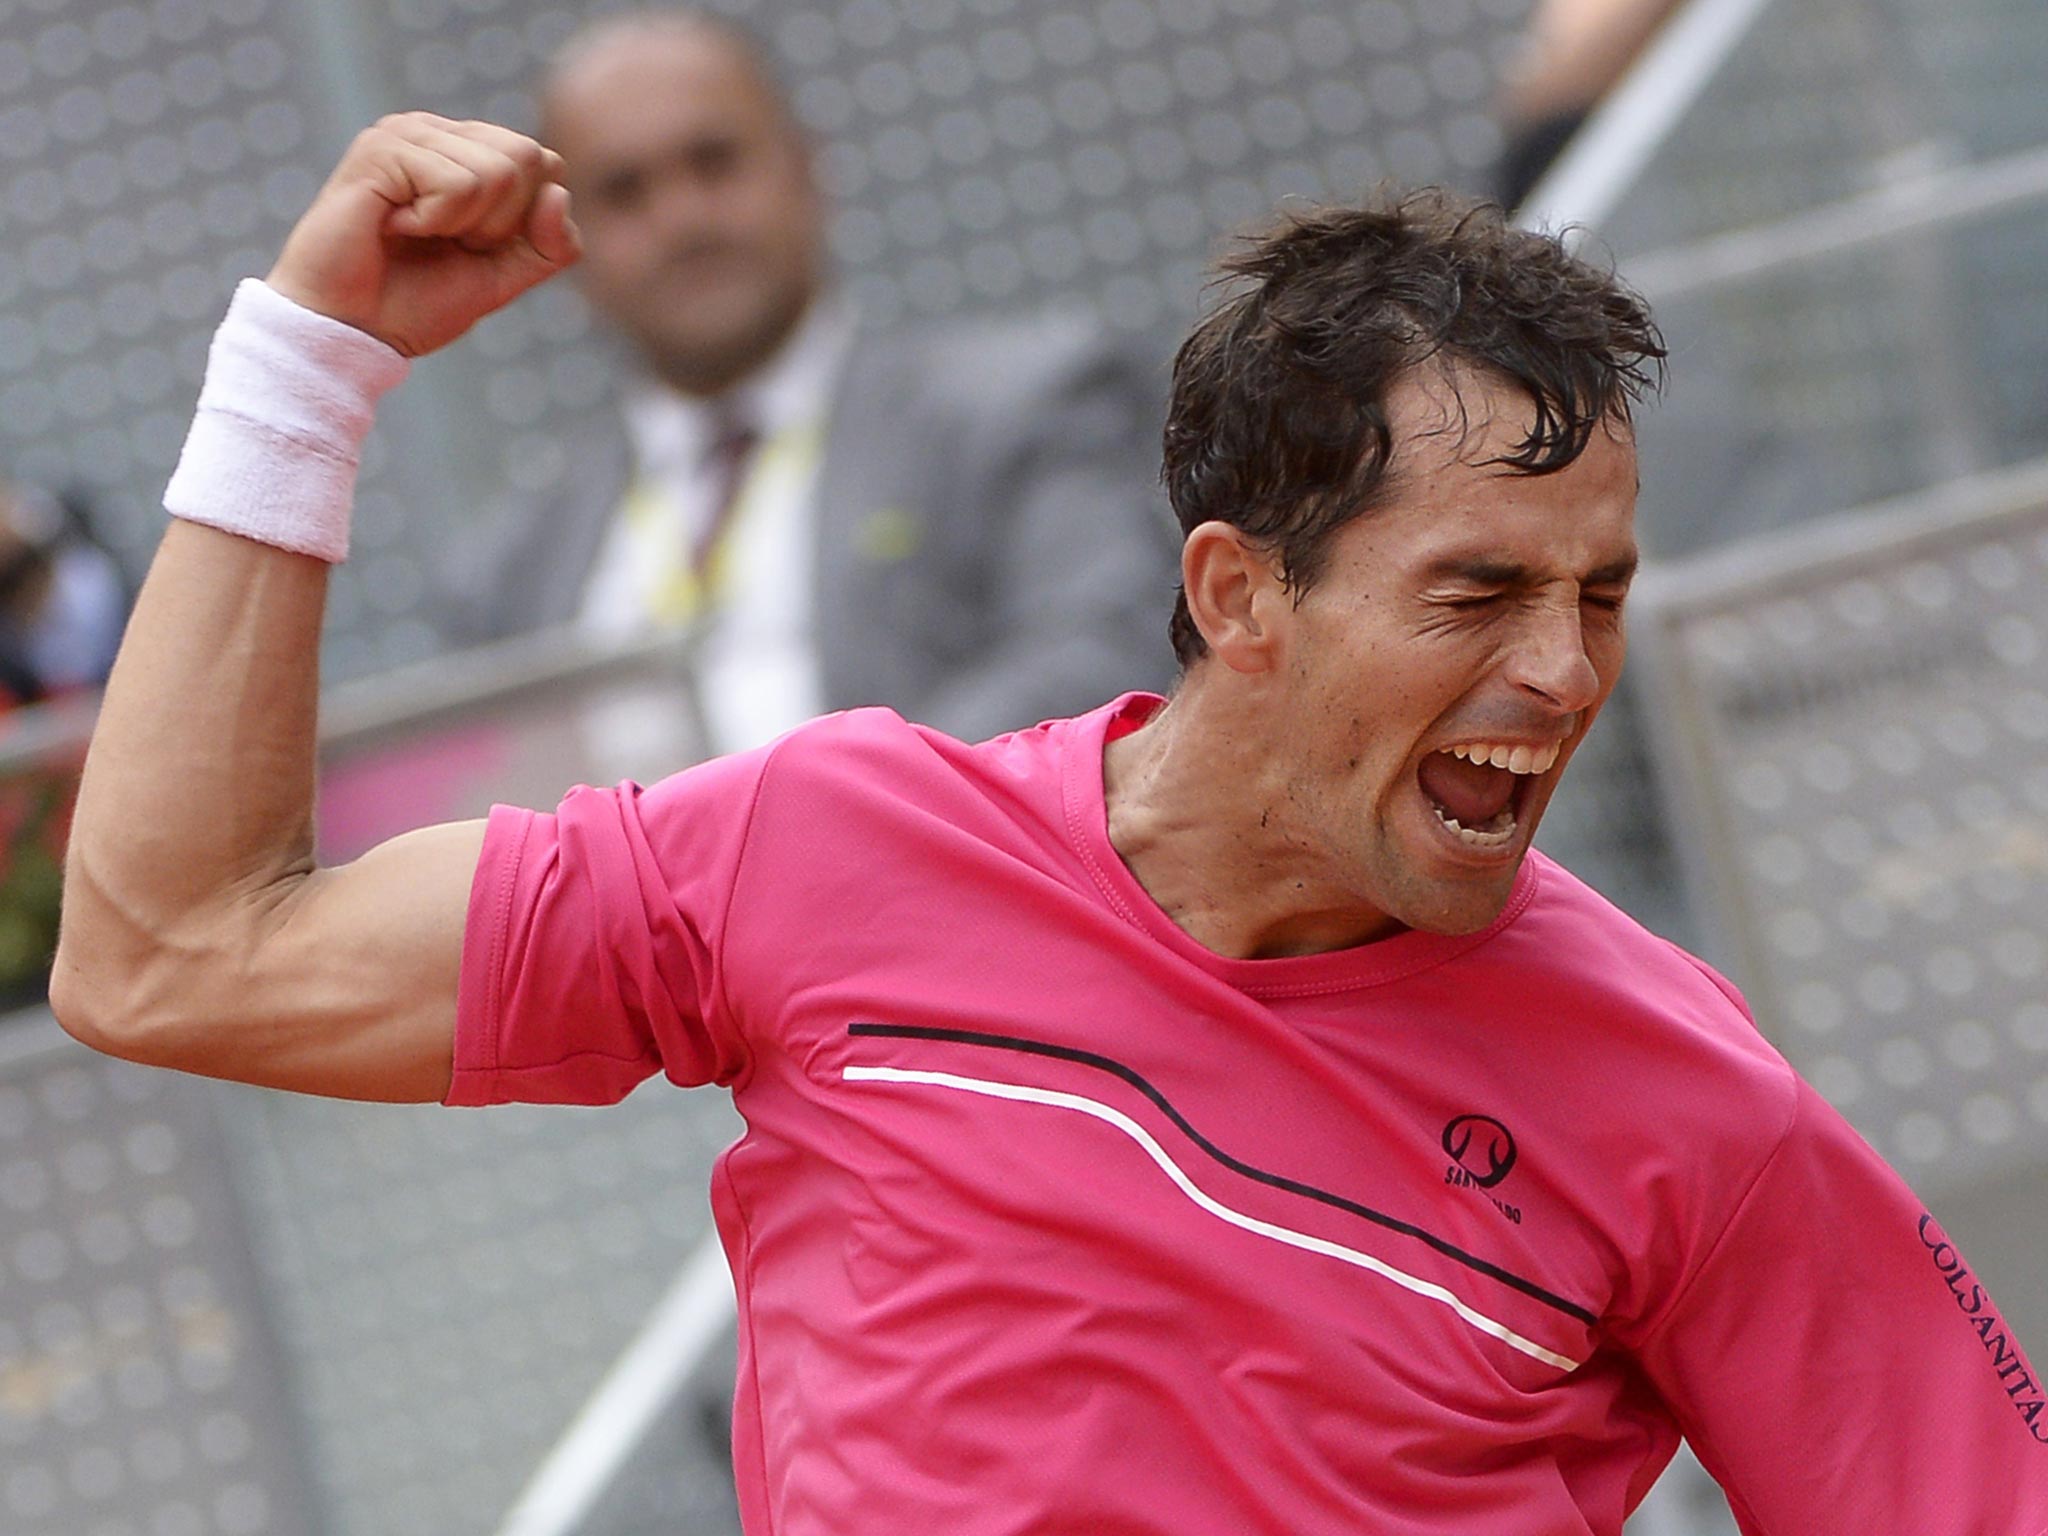 Santiago Giraldo celebrates after beating Andy Murray at the Madrid Masters
yesterday